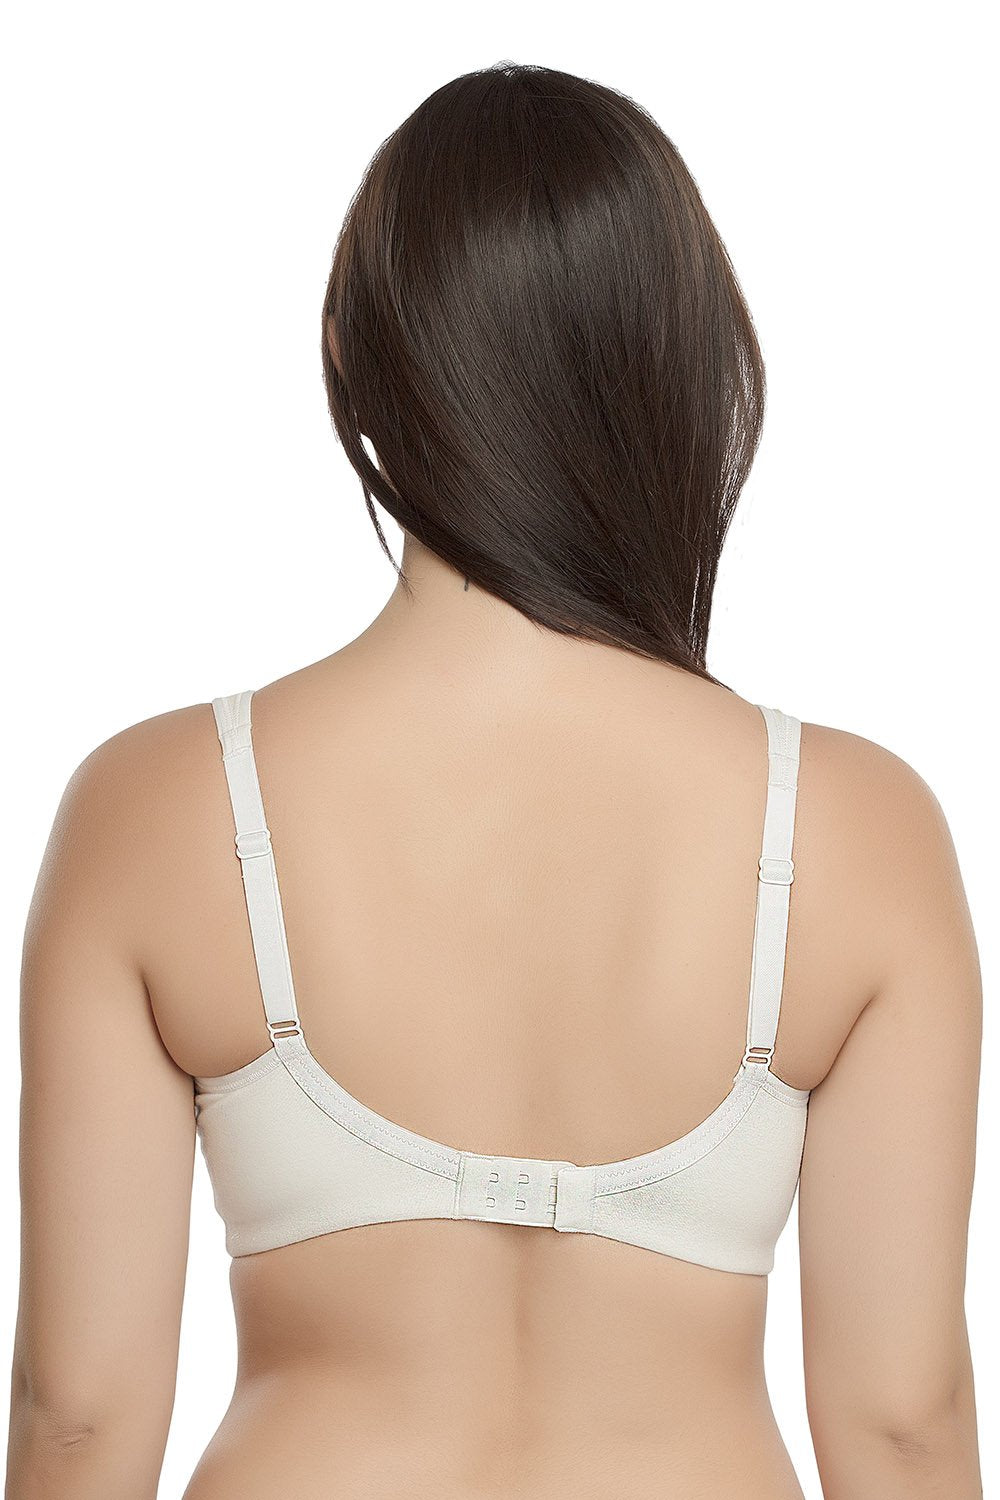 Buy InnerSense Bamboo Cotton Padded Non-Wired Full Coverage